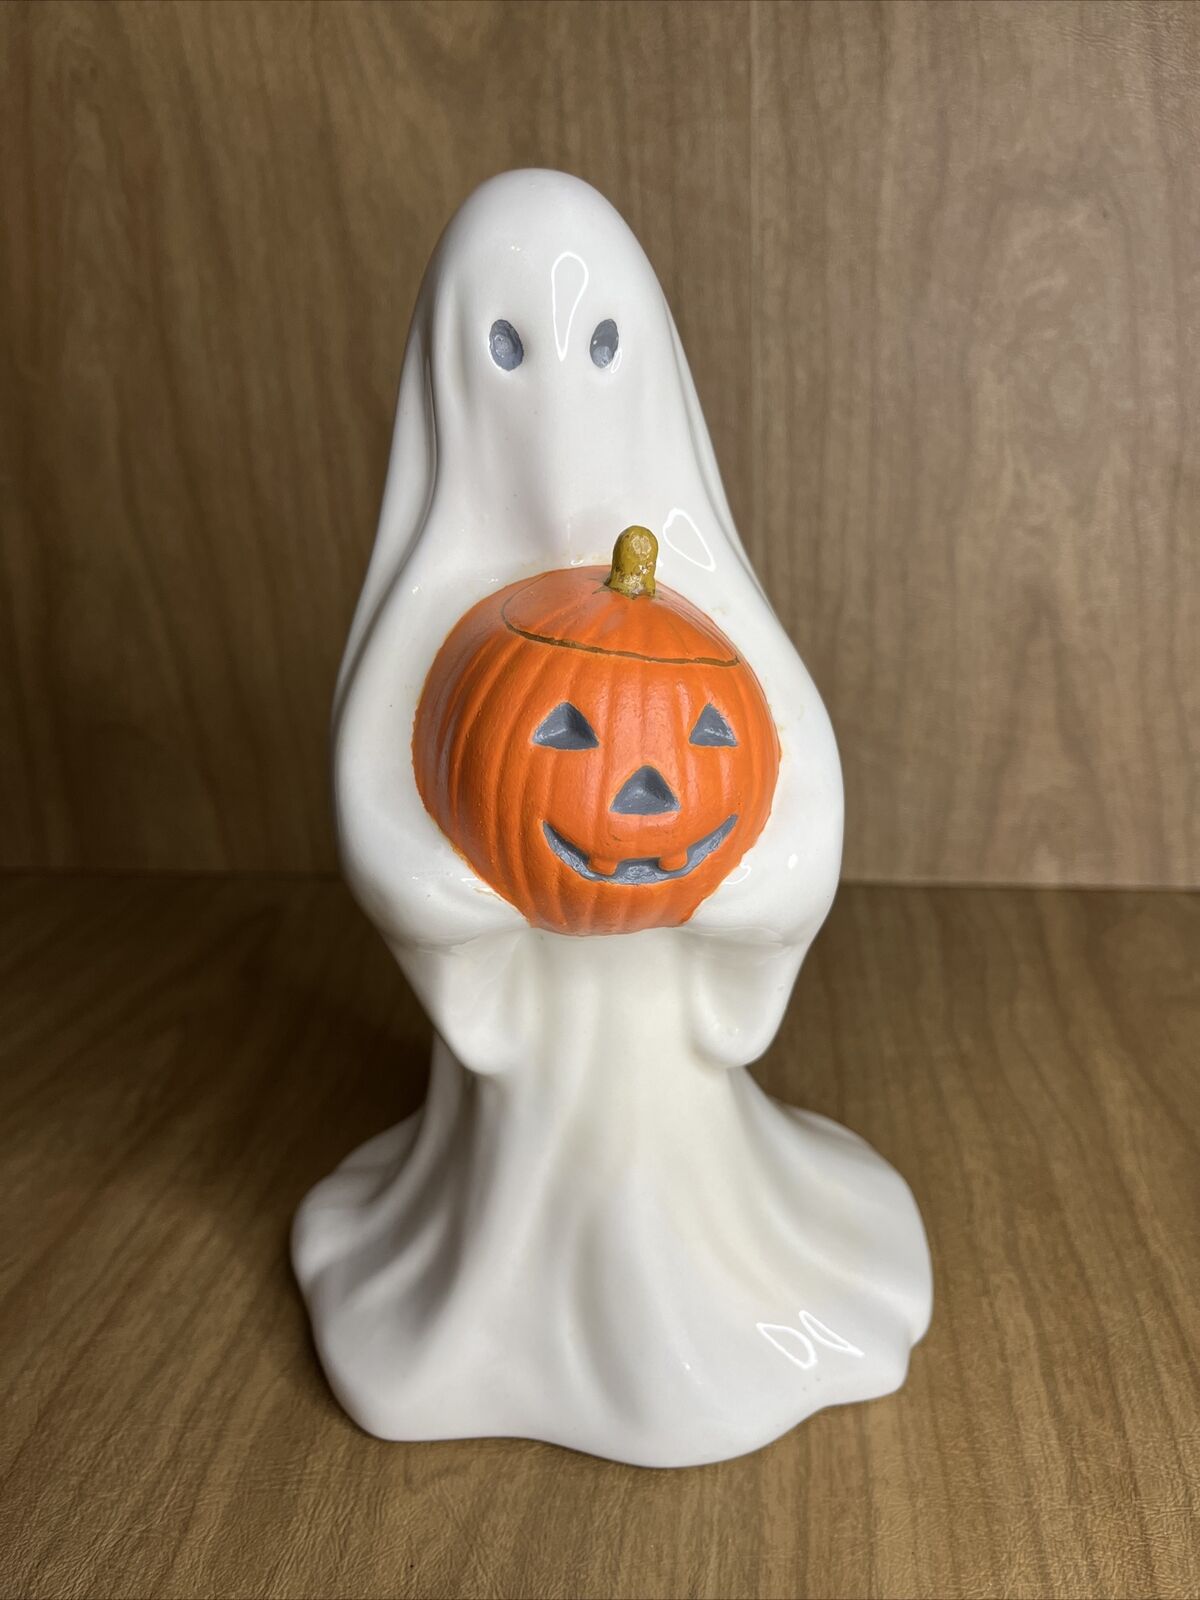 Vintage 1980s Ghost Statue Holding Jack-o-lantern Ceramic Homemade Hand Painted